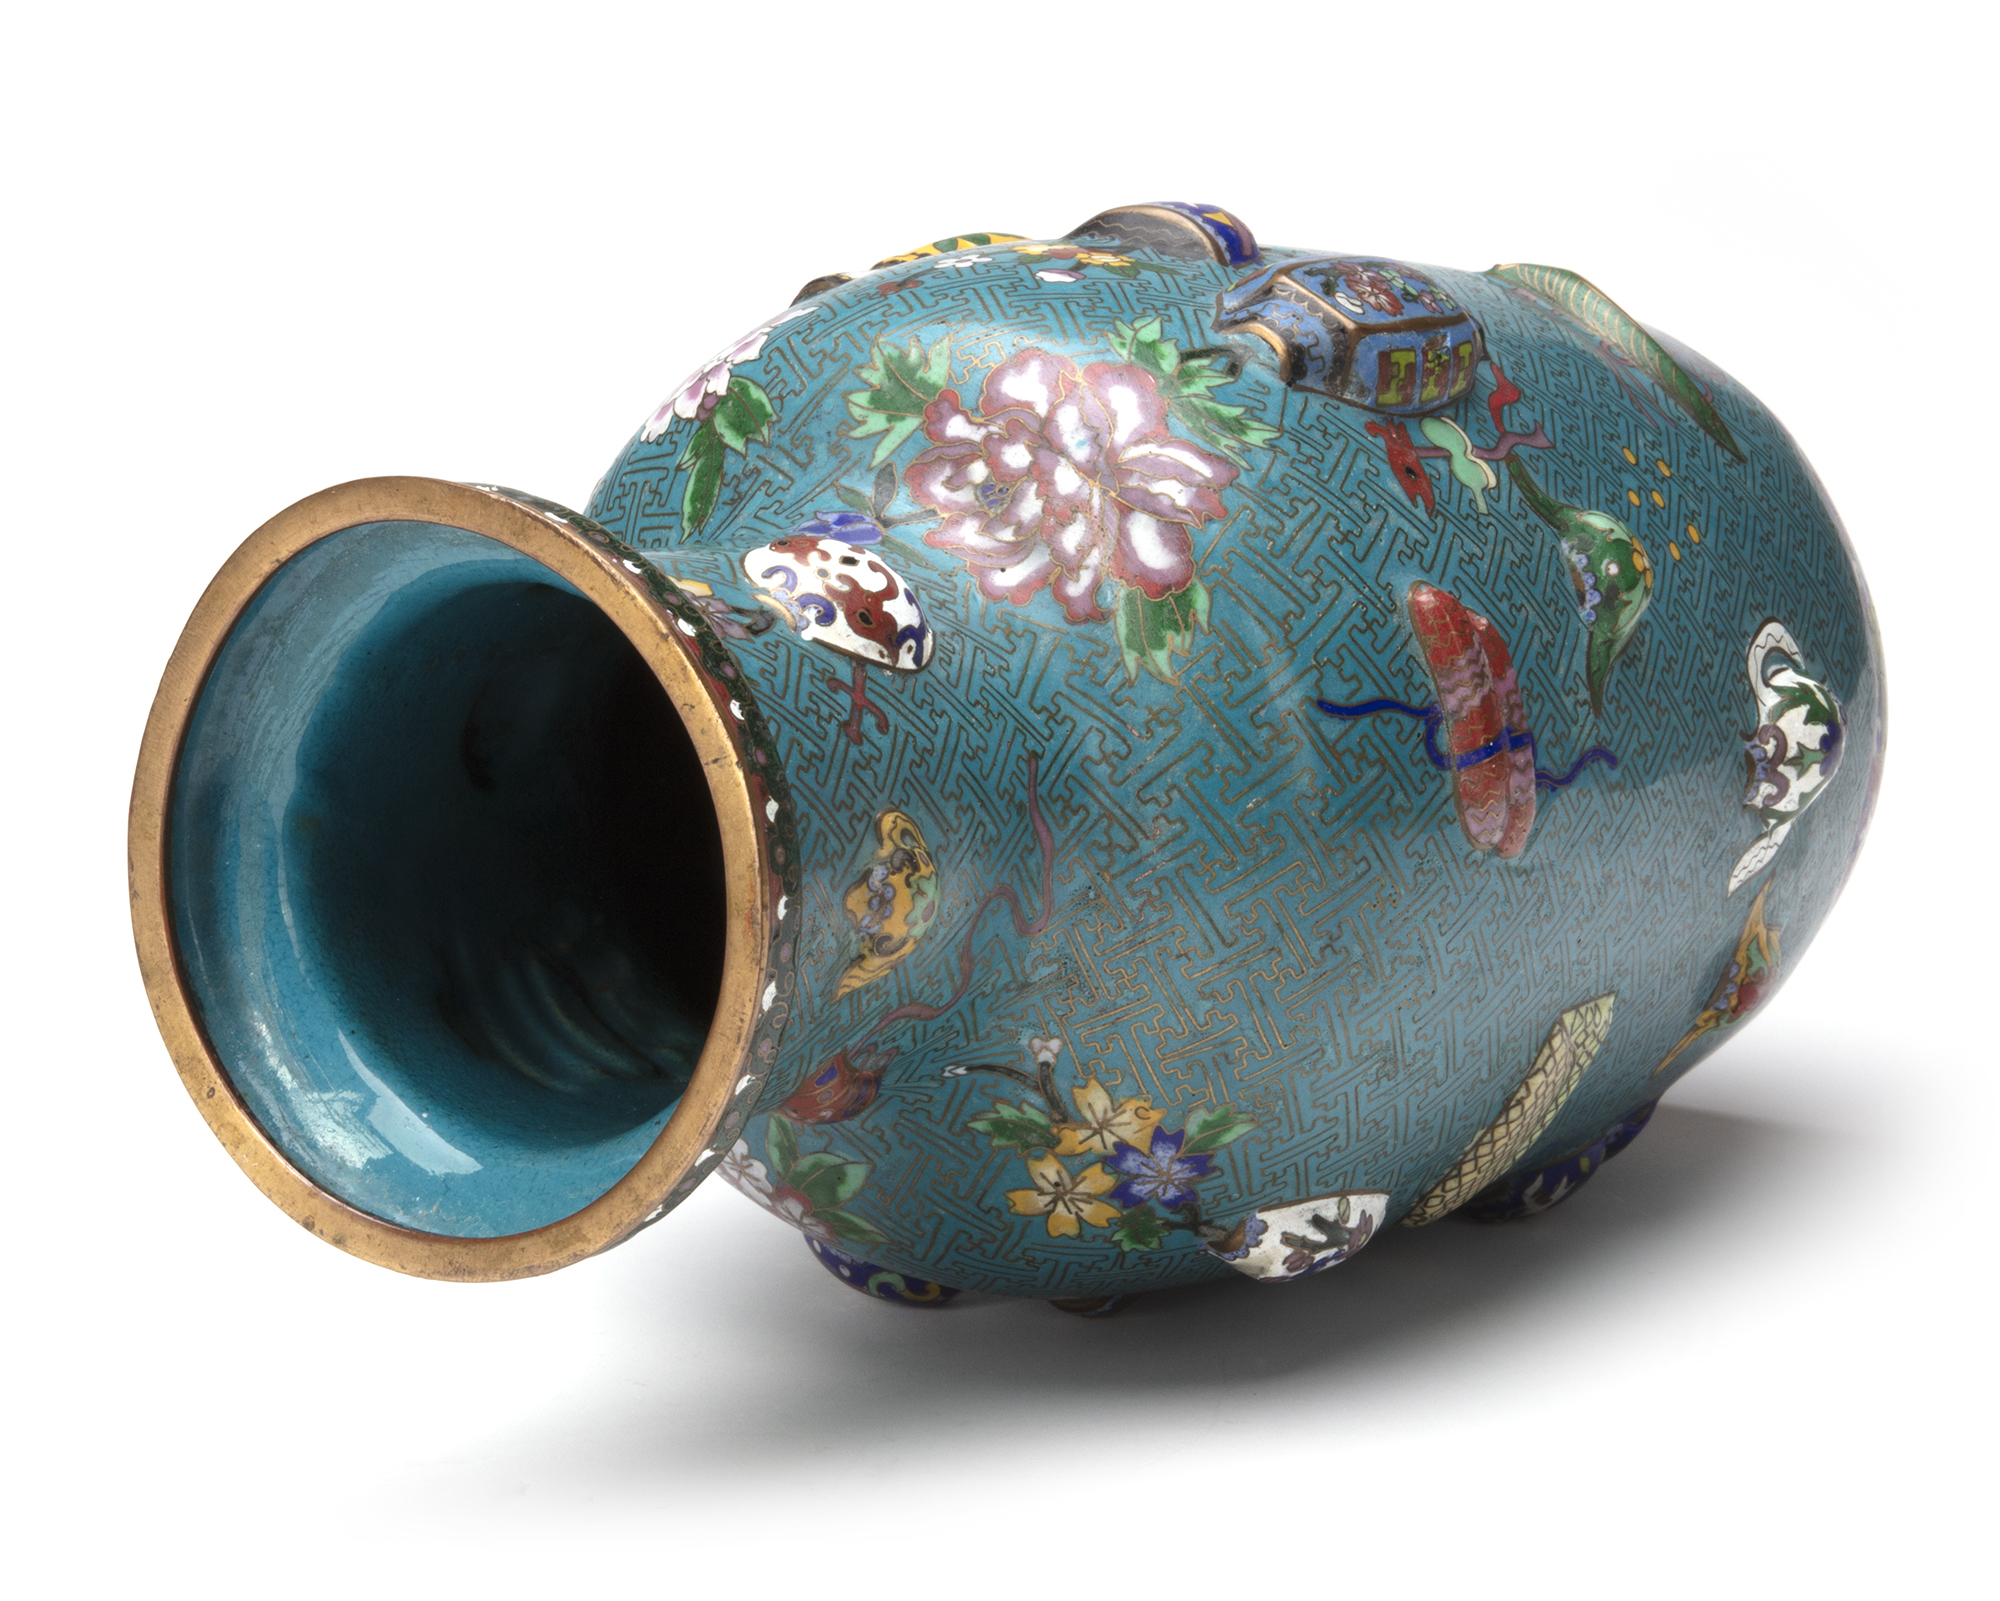 A CHINESE CLOISONNE ENAMEL VASE, 19TH/20TH CENTURY - Image 5 of 5